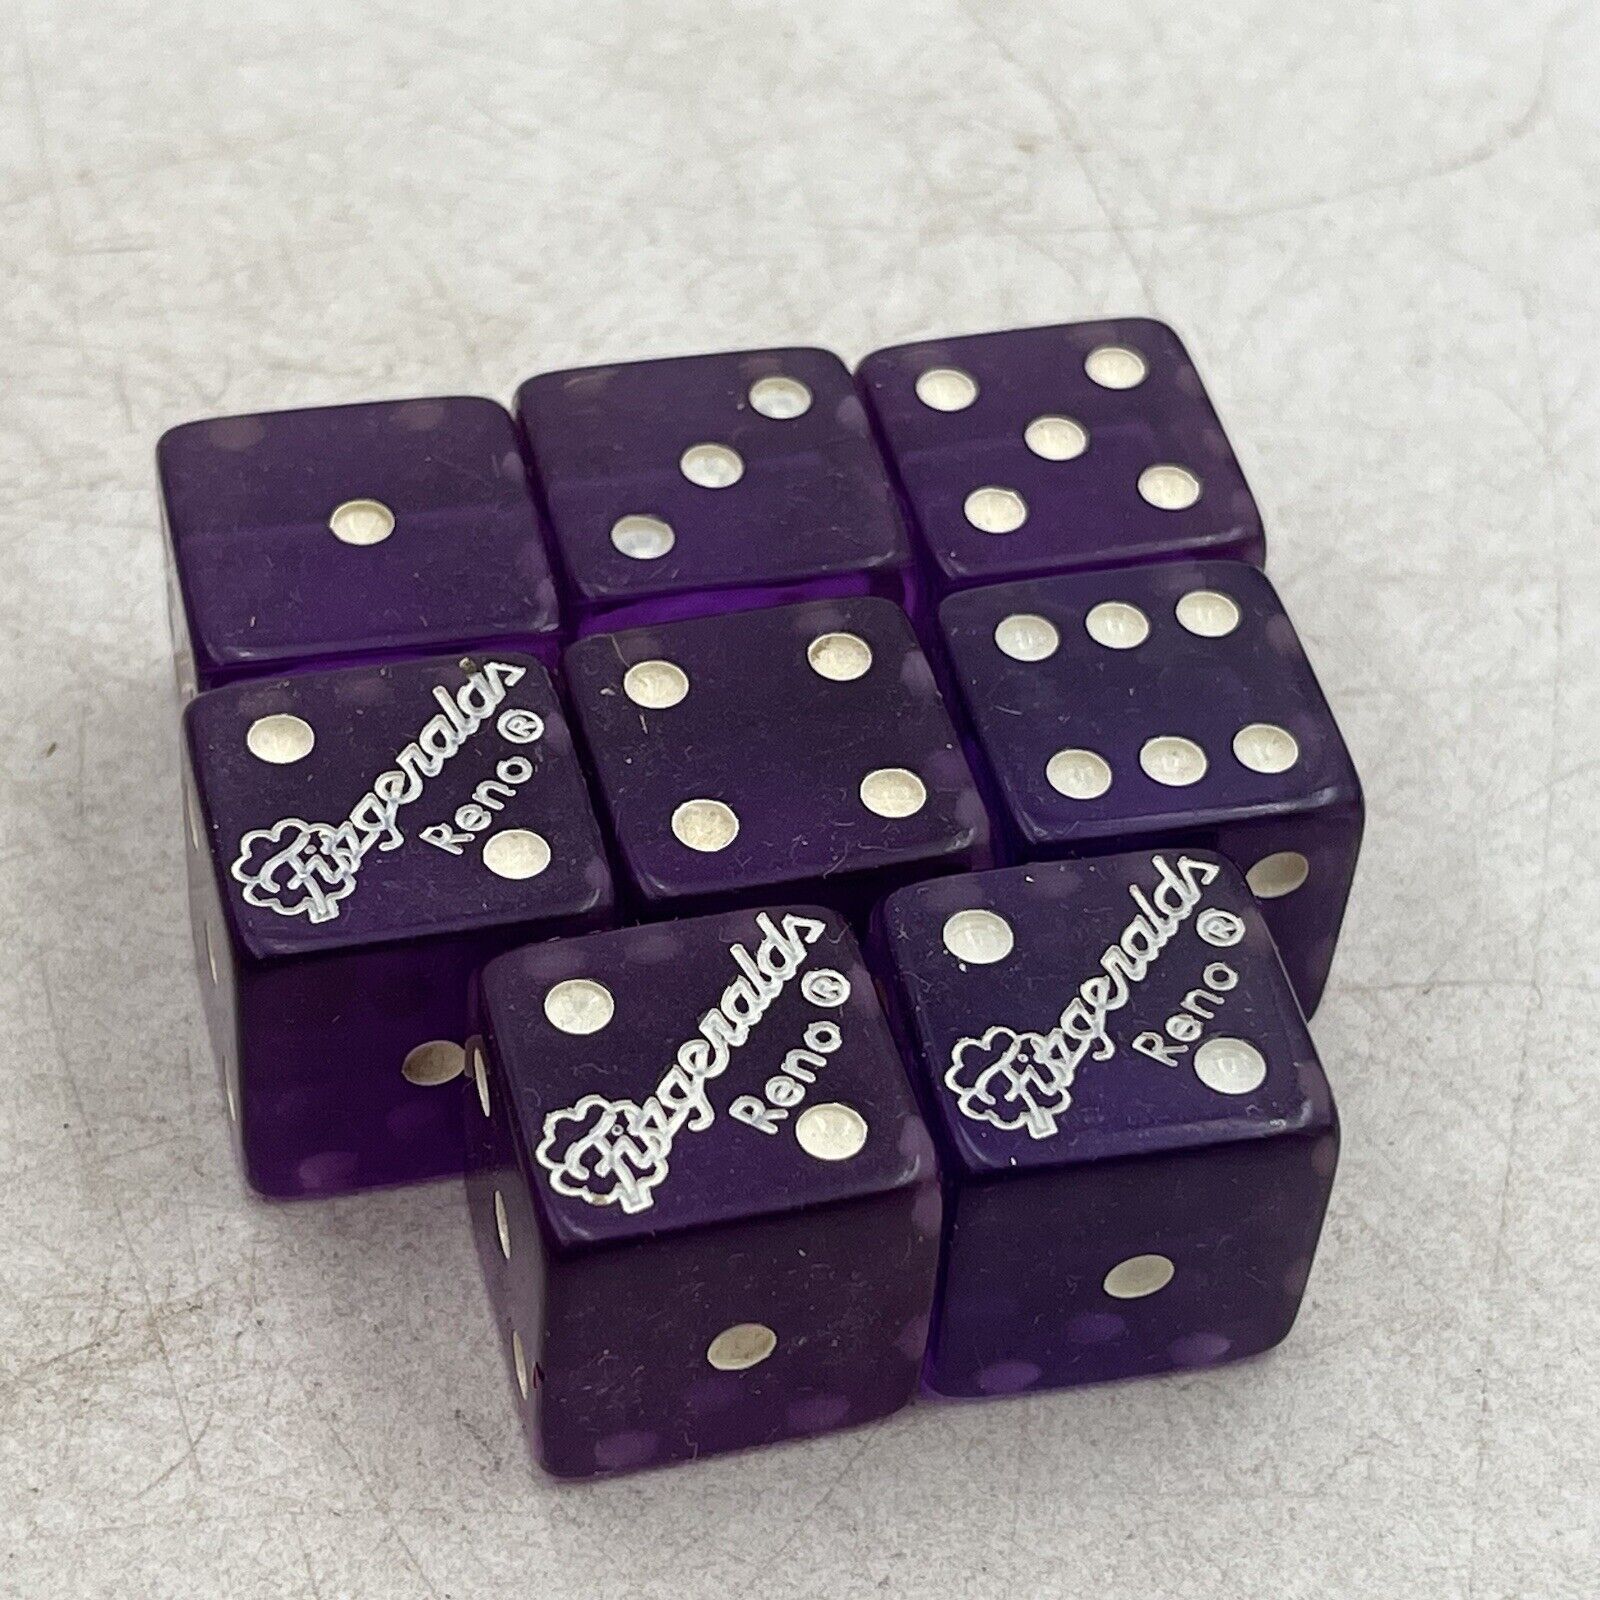 Lot of 8 VINTAGE FITZGERALDS RENO PURPLE DICE Game Night Collectible Replacement